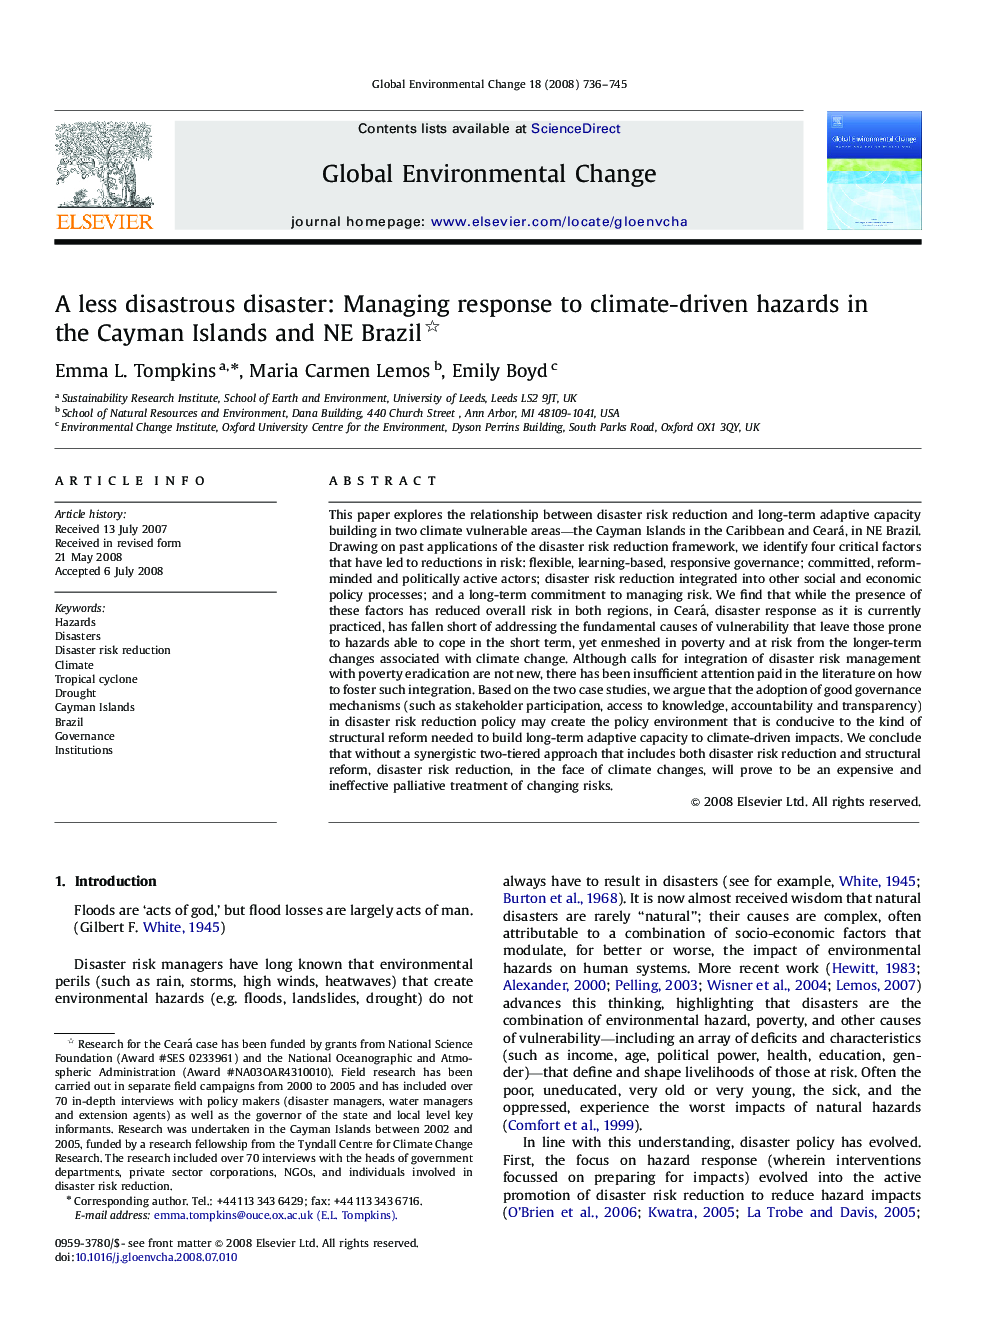 A less disastrous disaster: Managing response to climate-driven hazards in the Cayman Islands and NE Brazil 